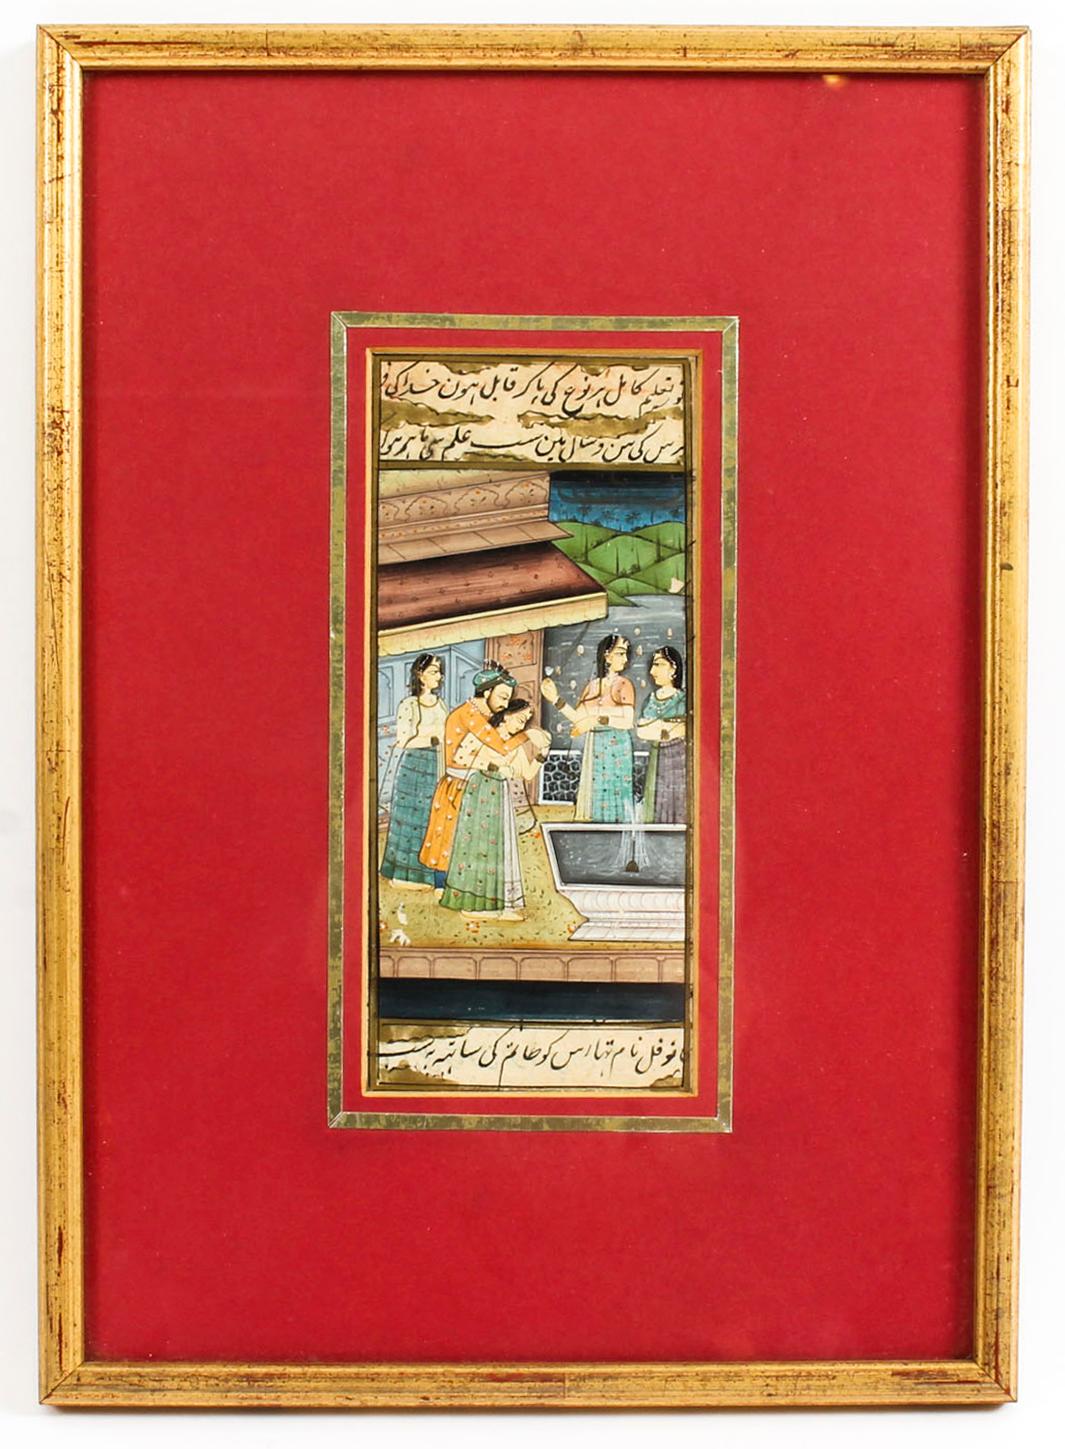 A beautiful and rare set of four 19th century miniature paintings of scenes from the Mughal harem, attractively matted in giltwood frames.

Painted on paper, likely with squirrel or kitten hair brushes.

The paintings are in excellent condition for